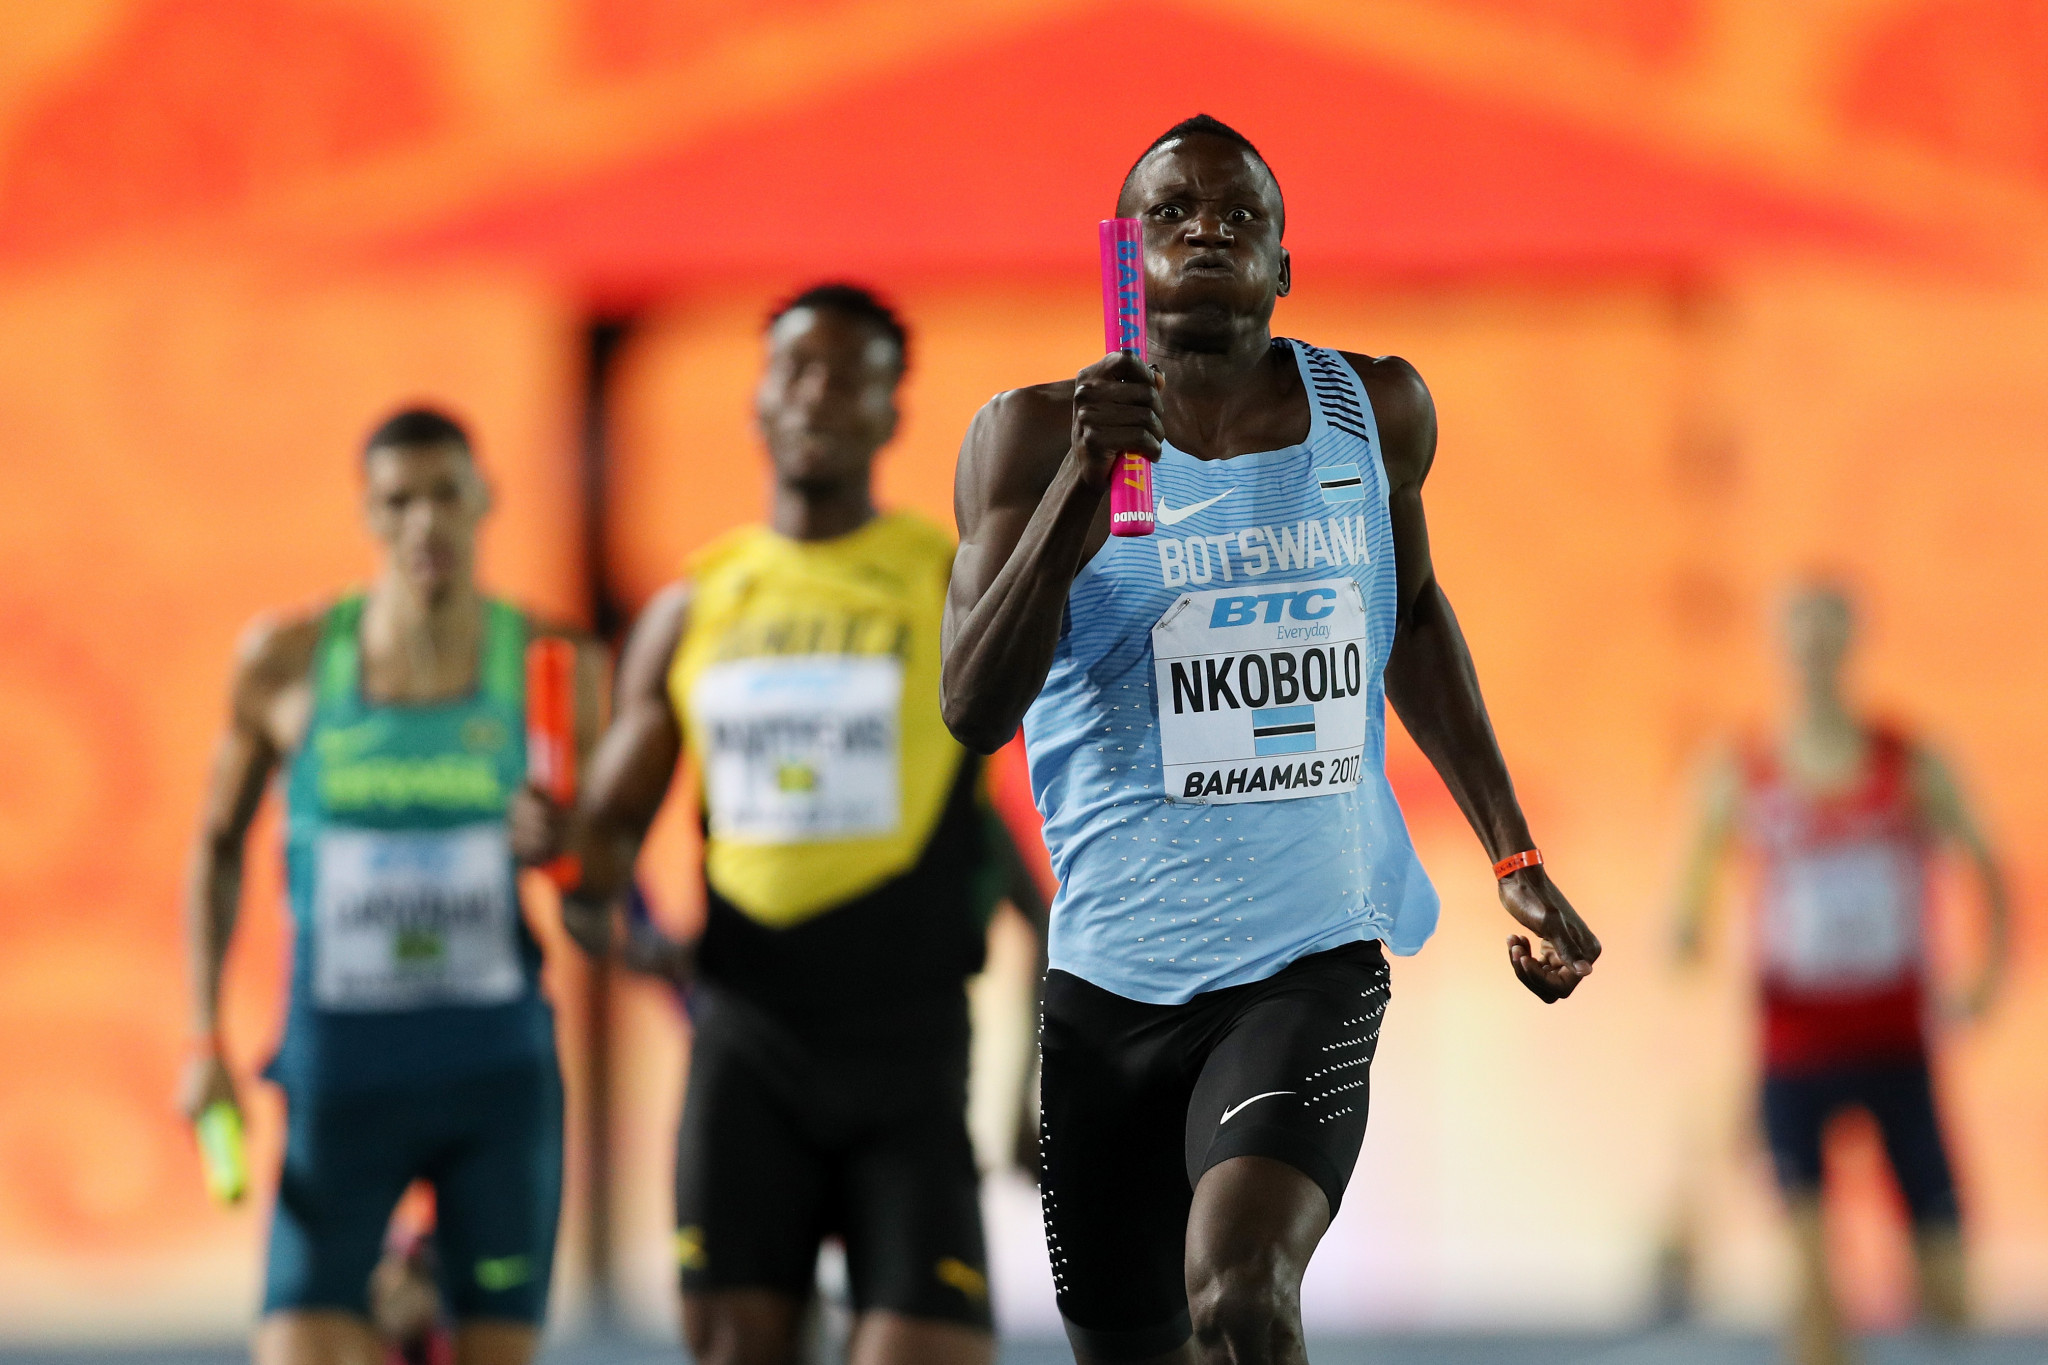 Commonwealth Games relay champion Nkobolo moves hospital but recovery still unclear